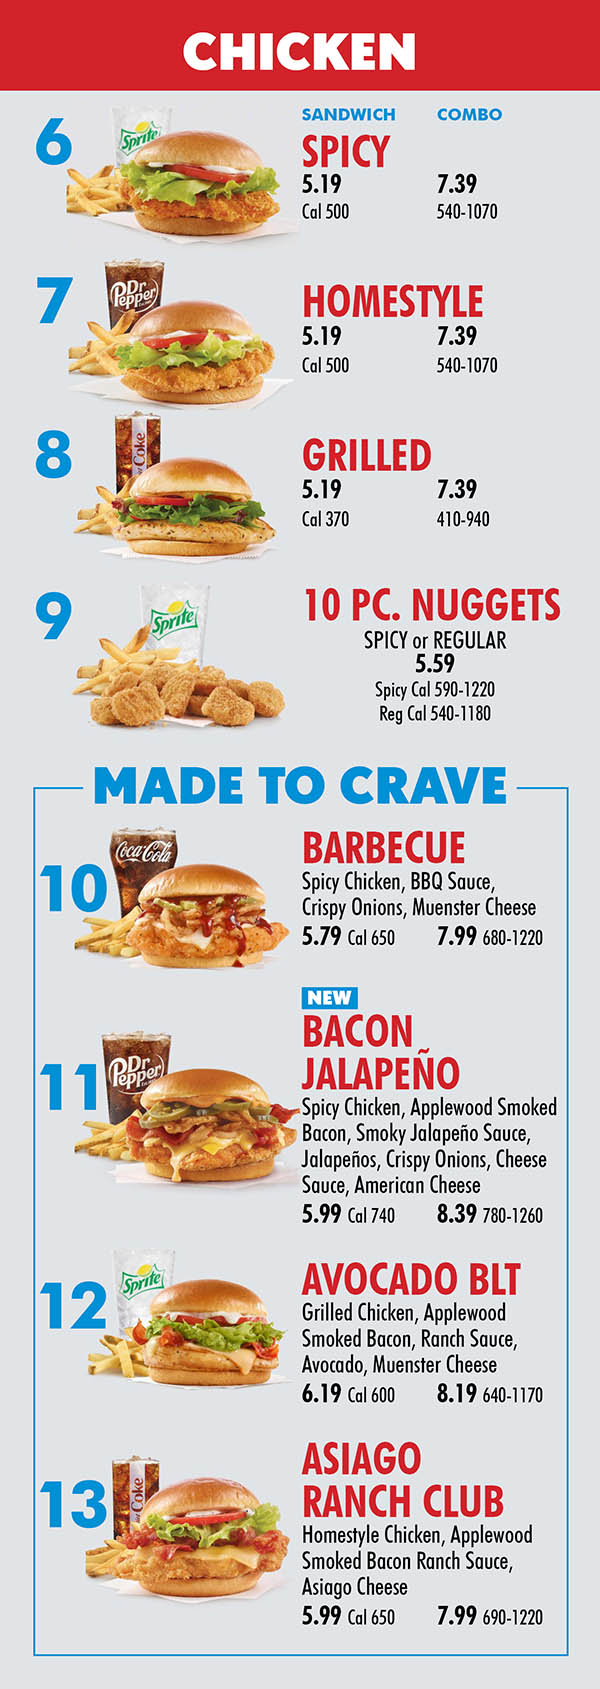 Wendy's Downtown Lincoln NE Menu Page 2
CHICKEN
6
MADE TO CRAVE
10
11
12
7
8
SANDWICH COMBO
SPICY
5.19 7.39
Cal 500 540-1070
HOMESTYLE
5.19 7.39
Cal 500 540-1070
GRILLED
5.19 7.39
Cal 370 410-940
10 PC. NUGGETS
SPICY or REGULAR
5.59
Spicy Cal 590-1220
Reg Cal 540-1180
BARBECUE
Spicy Chicken, BBQ Sauce,
Crispy Onions, Muenster Cheese
5.79 Cal 650 7.99 680-1220
BACON
JALAPEÑO
Spicy Chicken, Applewood Smoked Bacon, Smoky Jalapeño Sauce, Jalapeños, Crispy Onions, Cheese Sauce, American Cheese
5.99 Cal 740 8.39 780-1260
AVOCADO BLT
Grilled Chicken, Applewood
Smoked Bacon, Ranch Sauce,
Avocado, Muenster Cheese
6.19 Cal 600 8.19 640-1170
ASIAGO
RANCH CLUB
Homestyle Chicken, Applewood
Smoked Bacon Ranch Sauce,
Asiago Cheese
5.99 Cal 650 7.99 690-1220